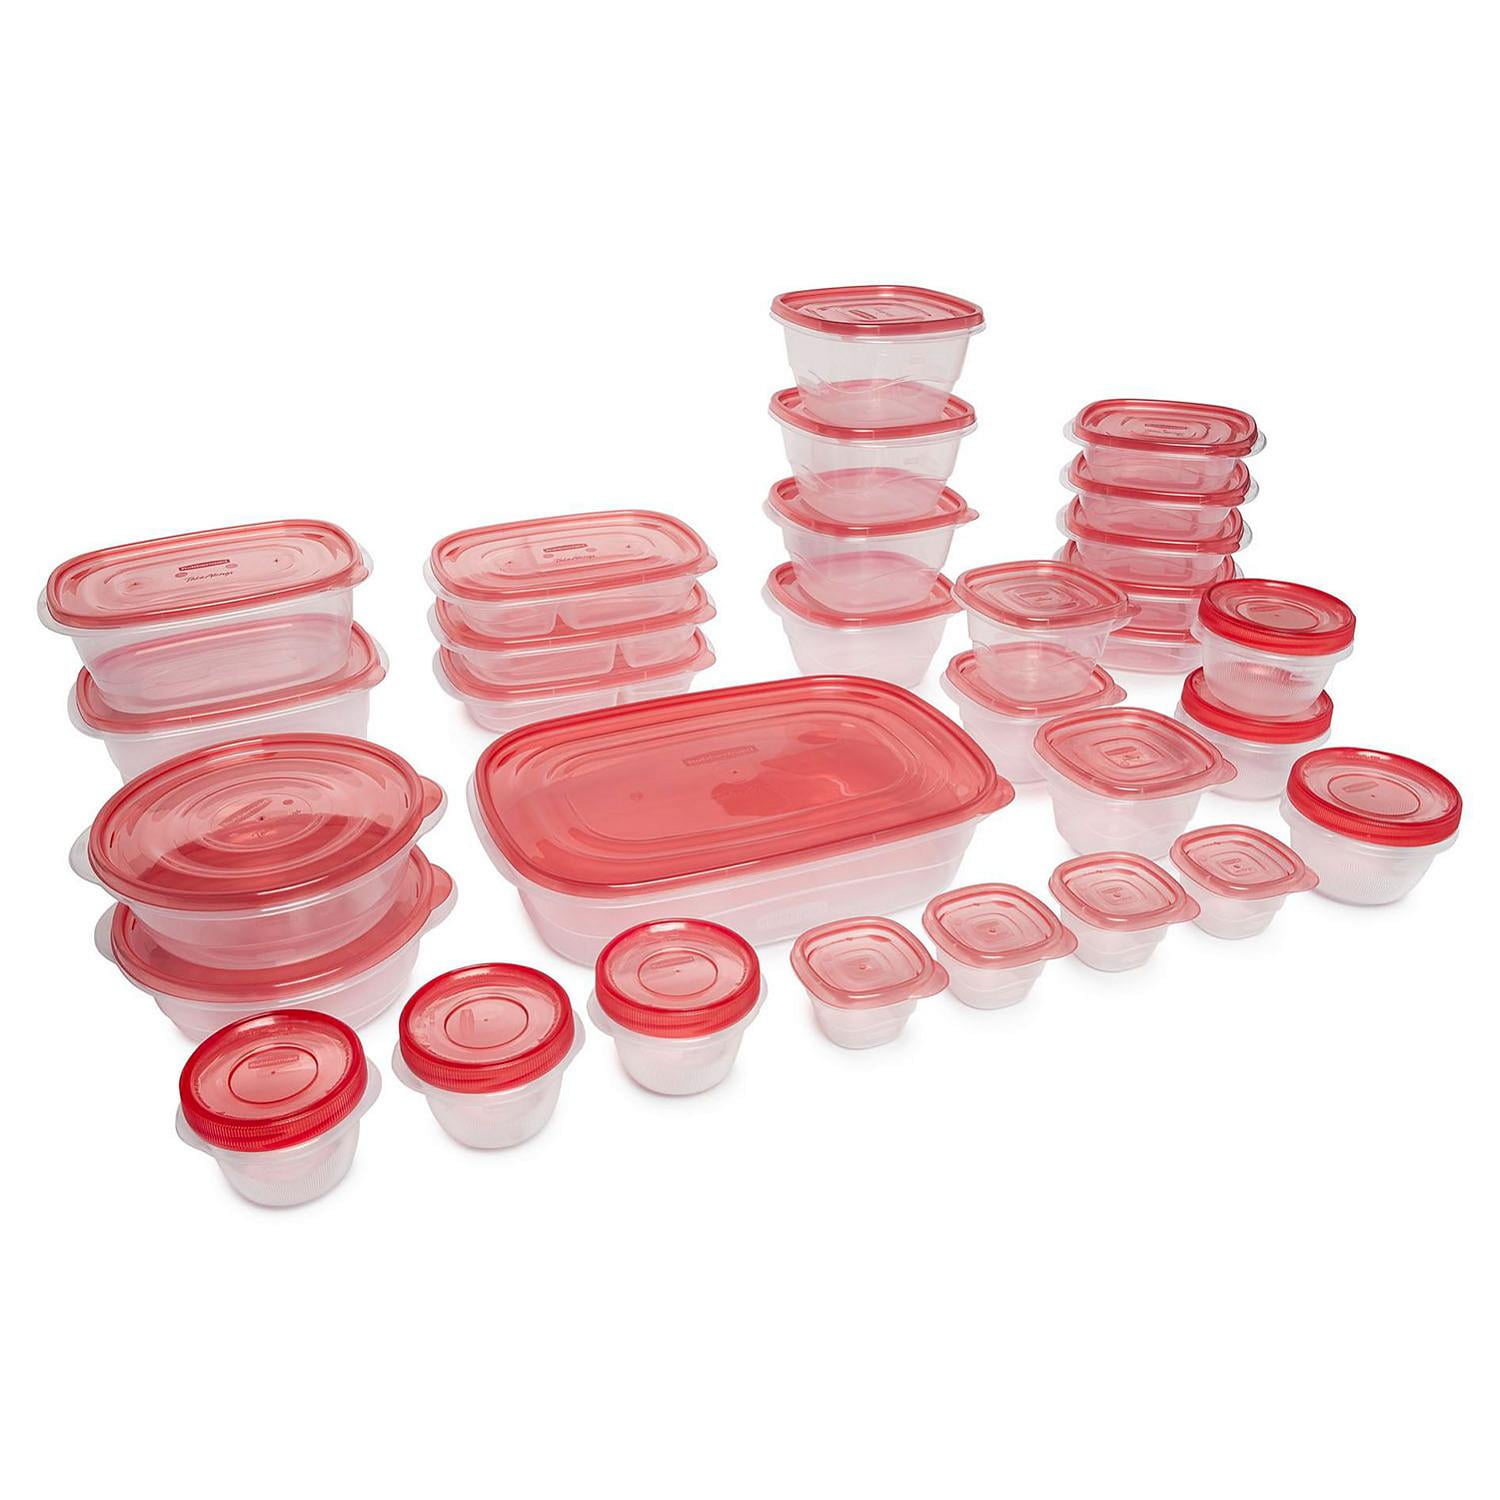 Rubbermaid TakeAlongs Food Storage Containers, 52 Pieces, Ruby Red